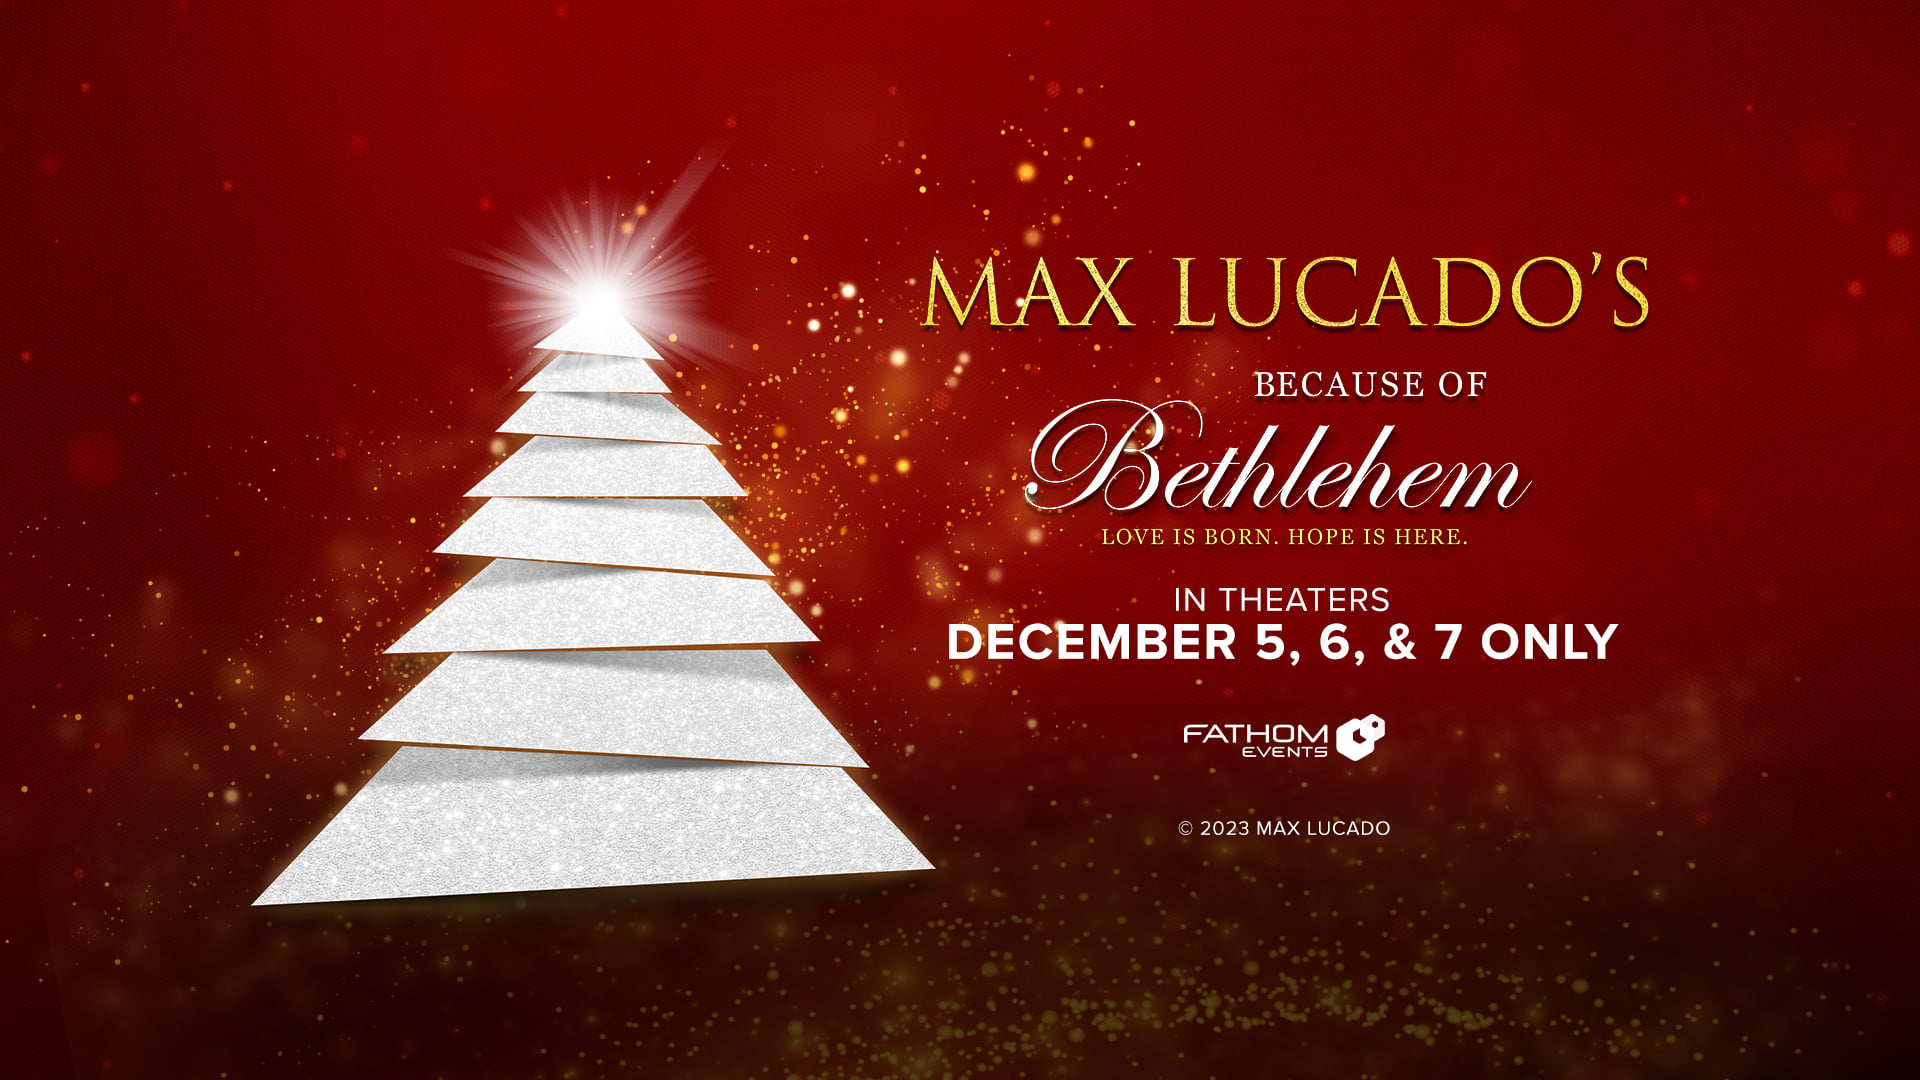 Because of Bethlehem with Max Lucado